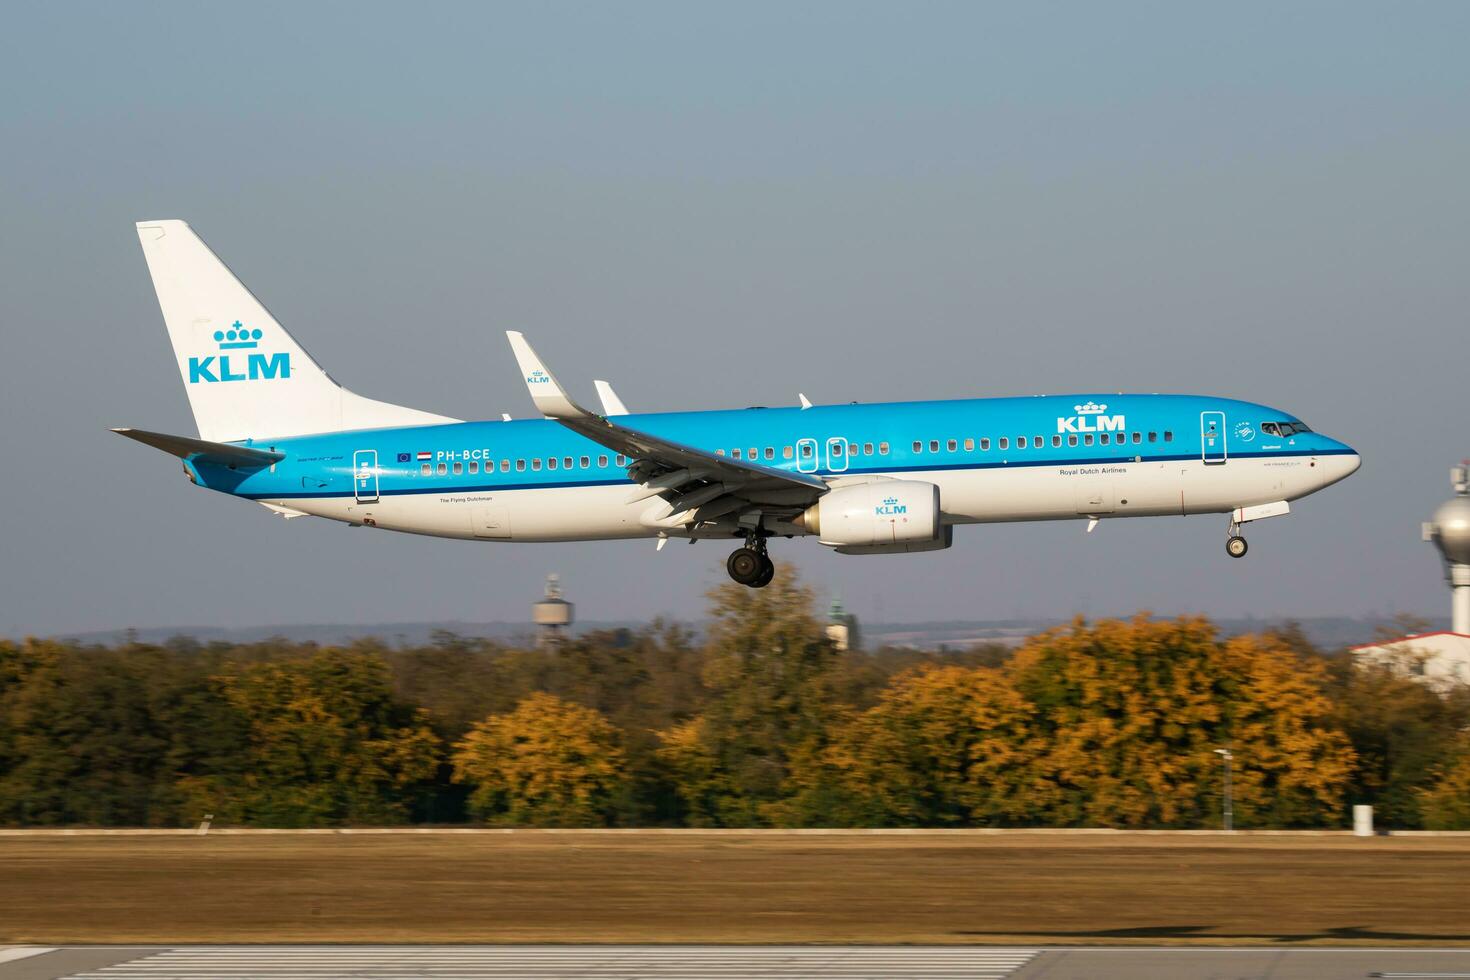 KLM Boeing 737-800 PH-BCE passenger plane arrival and landing at Budapest Airport photo